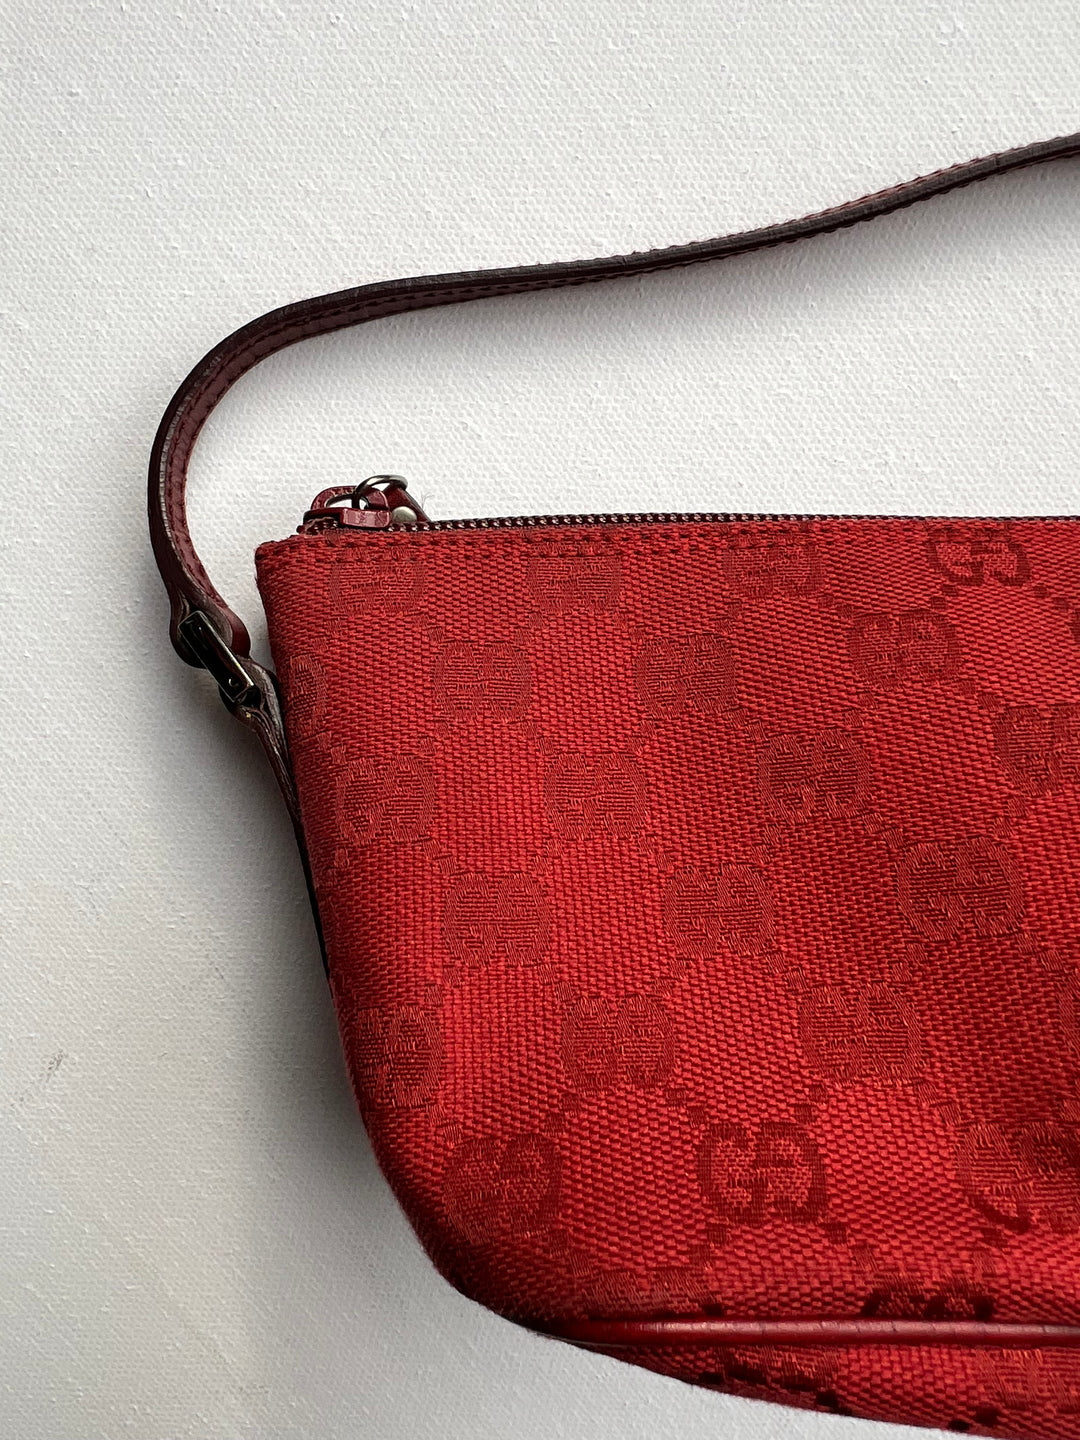 Gucci Monogram Small Pochette in red with top handle